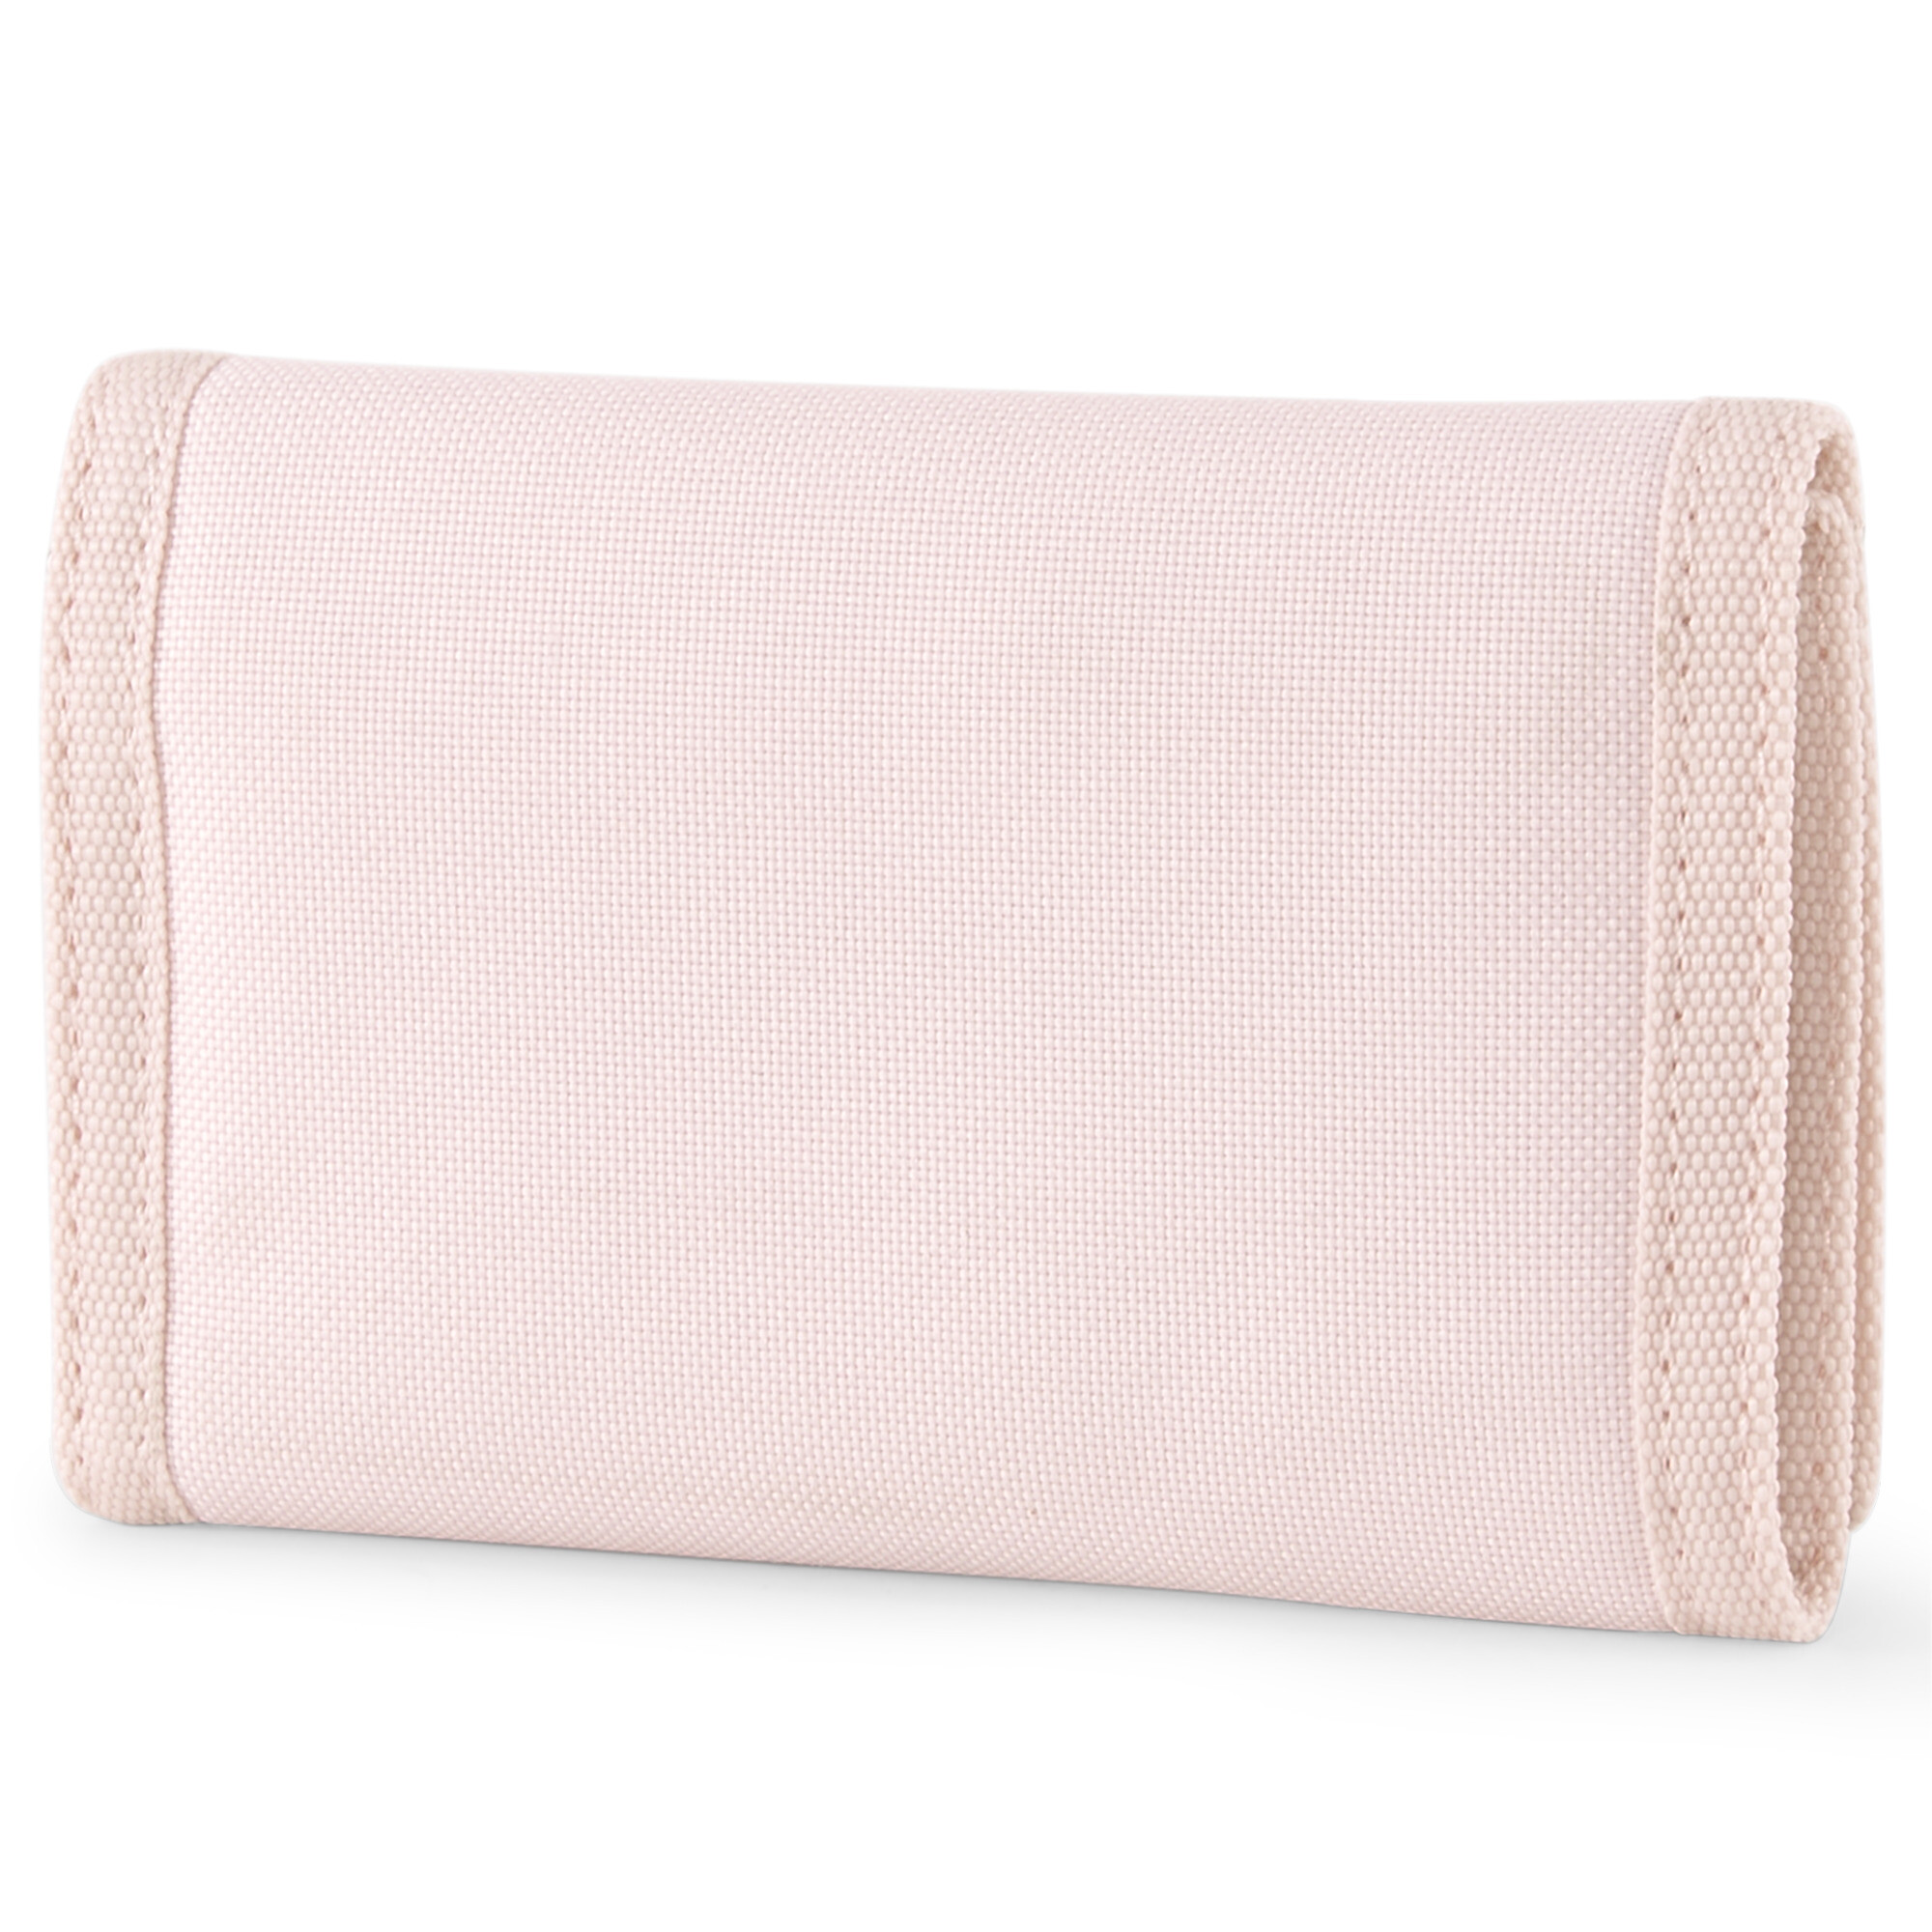 Men's Puma Phase Woven Wallet, Pink, Accessories